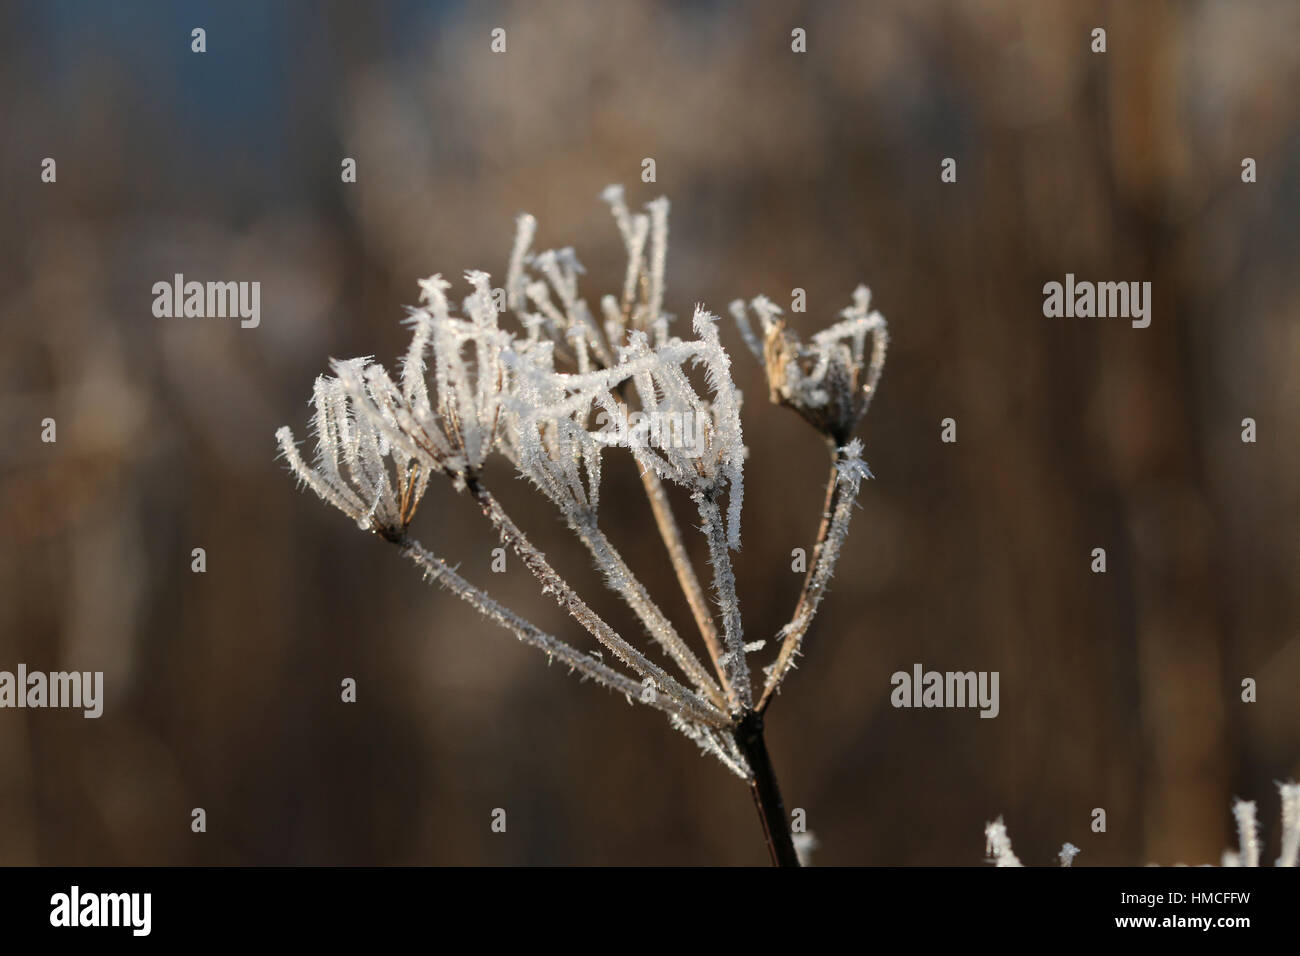 dried stalks of umbellifer plant coated with frost Stock Photo